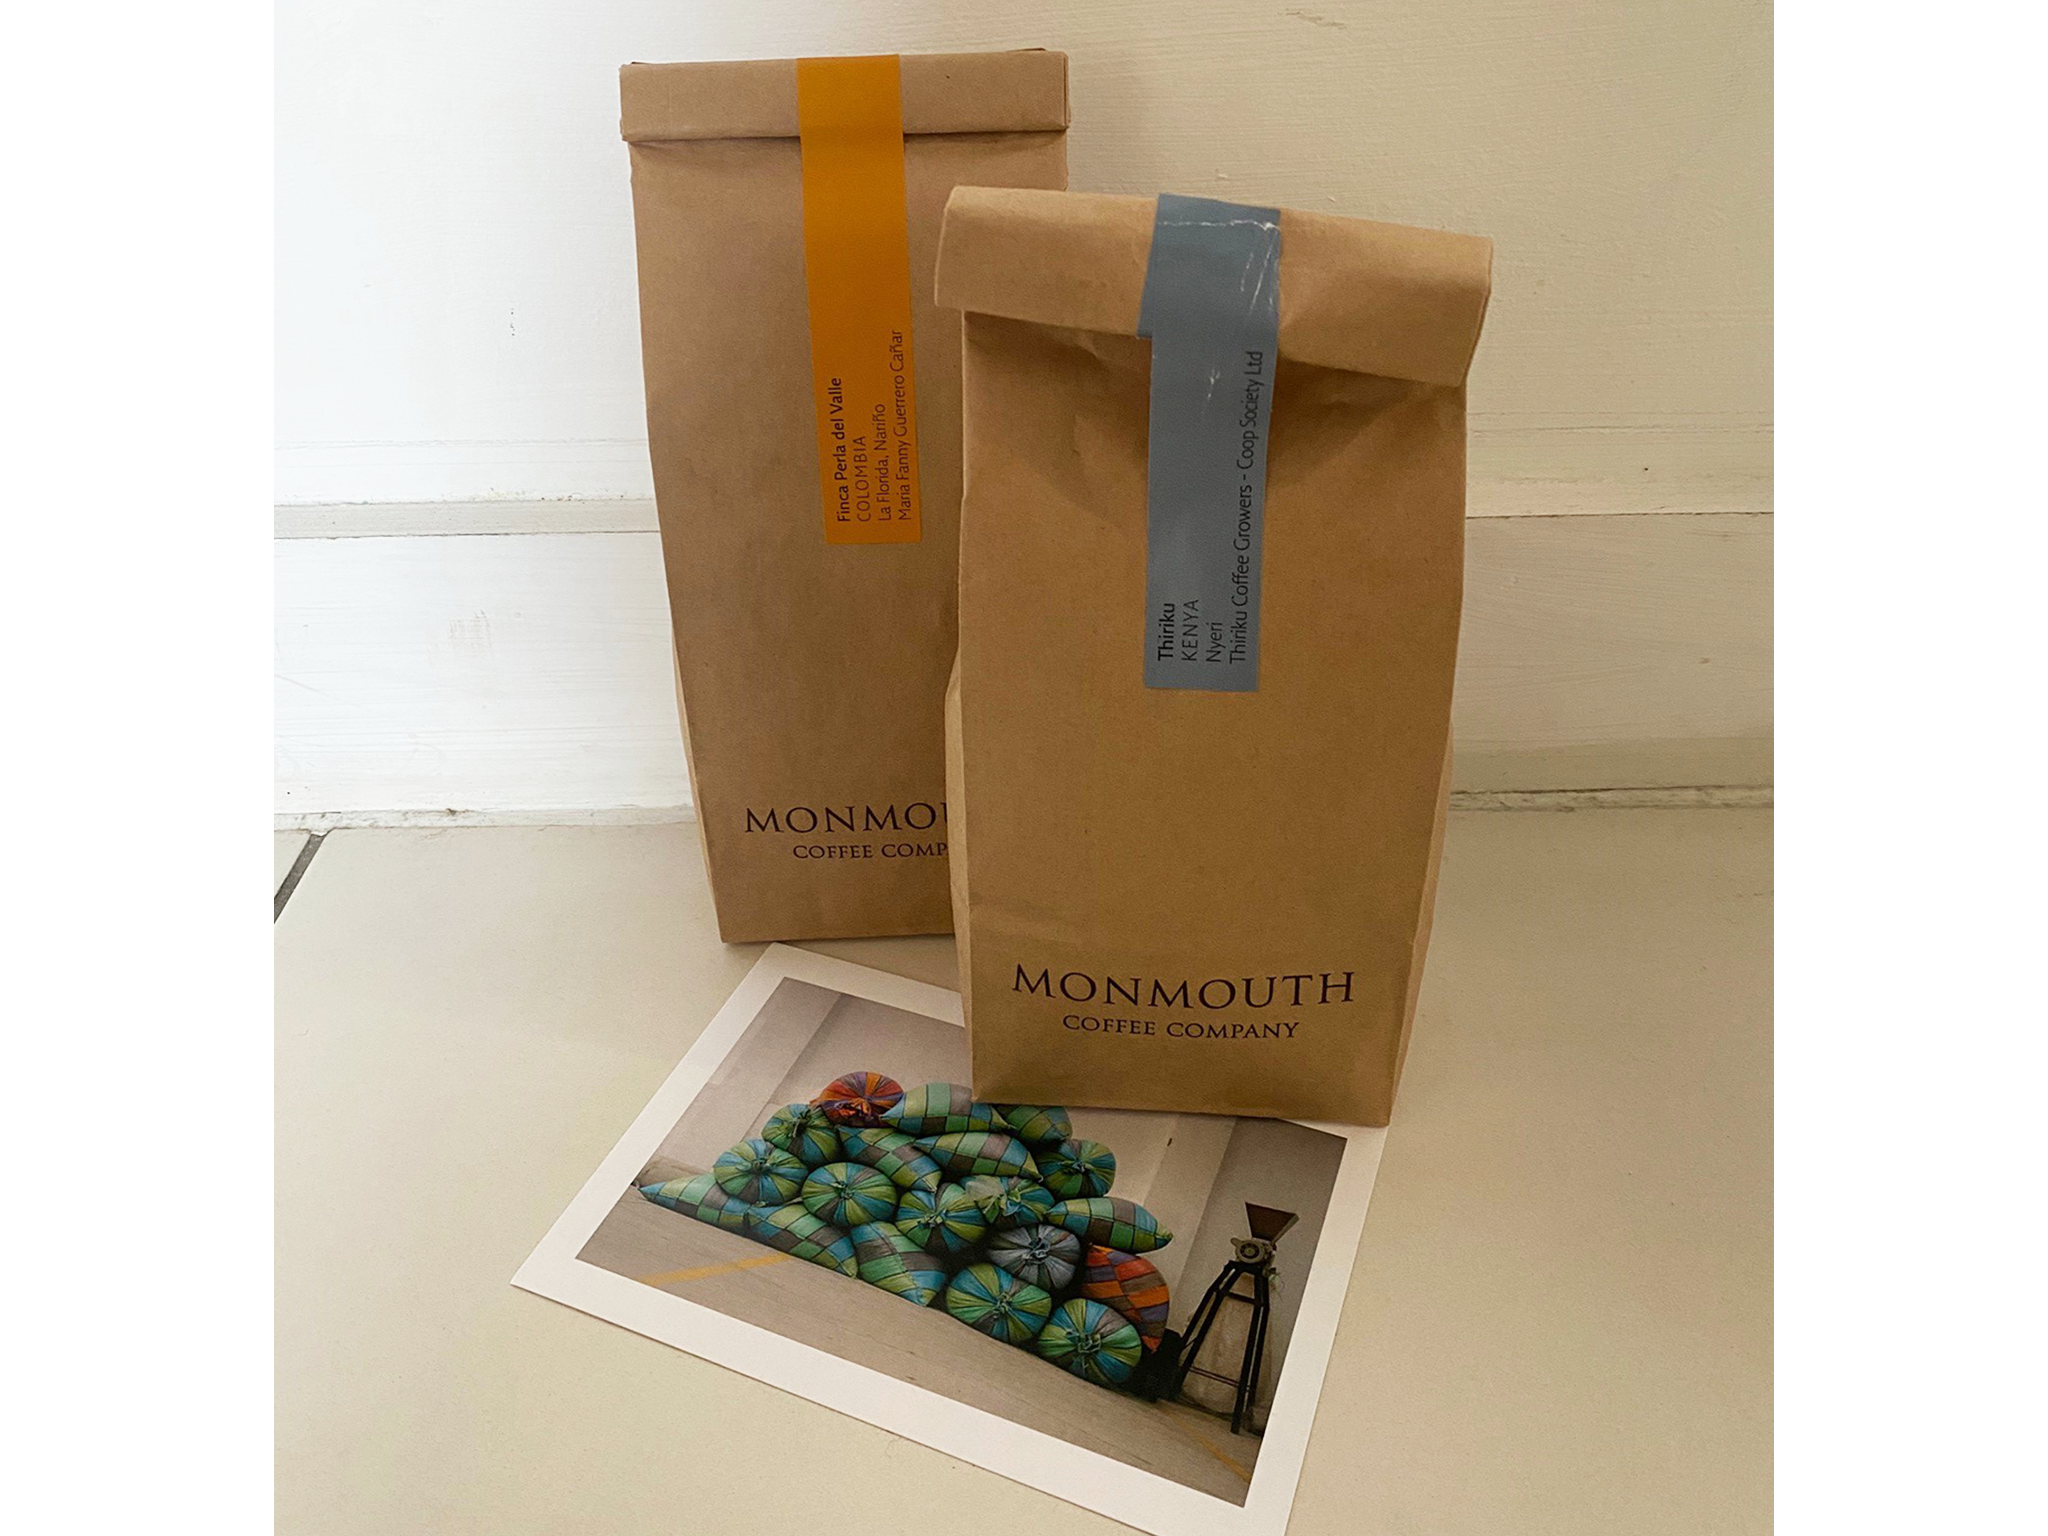 Monmouth subscription